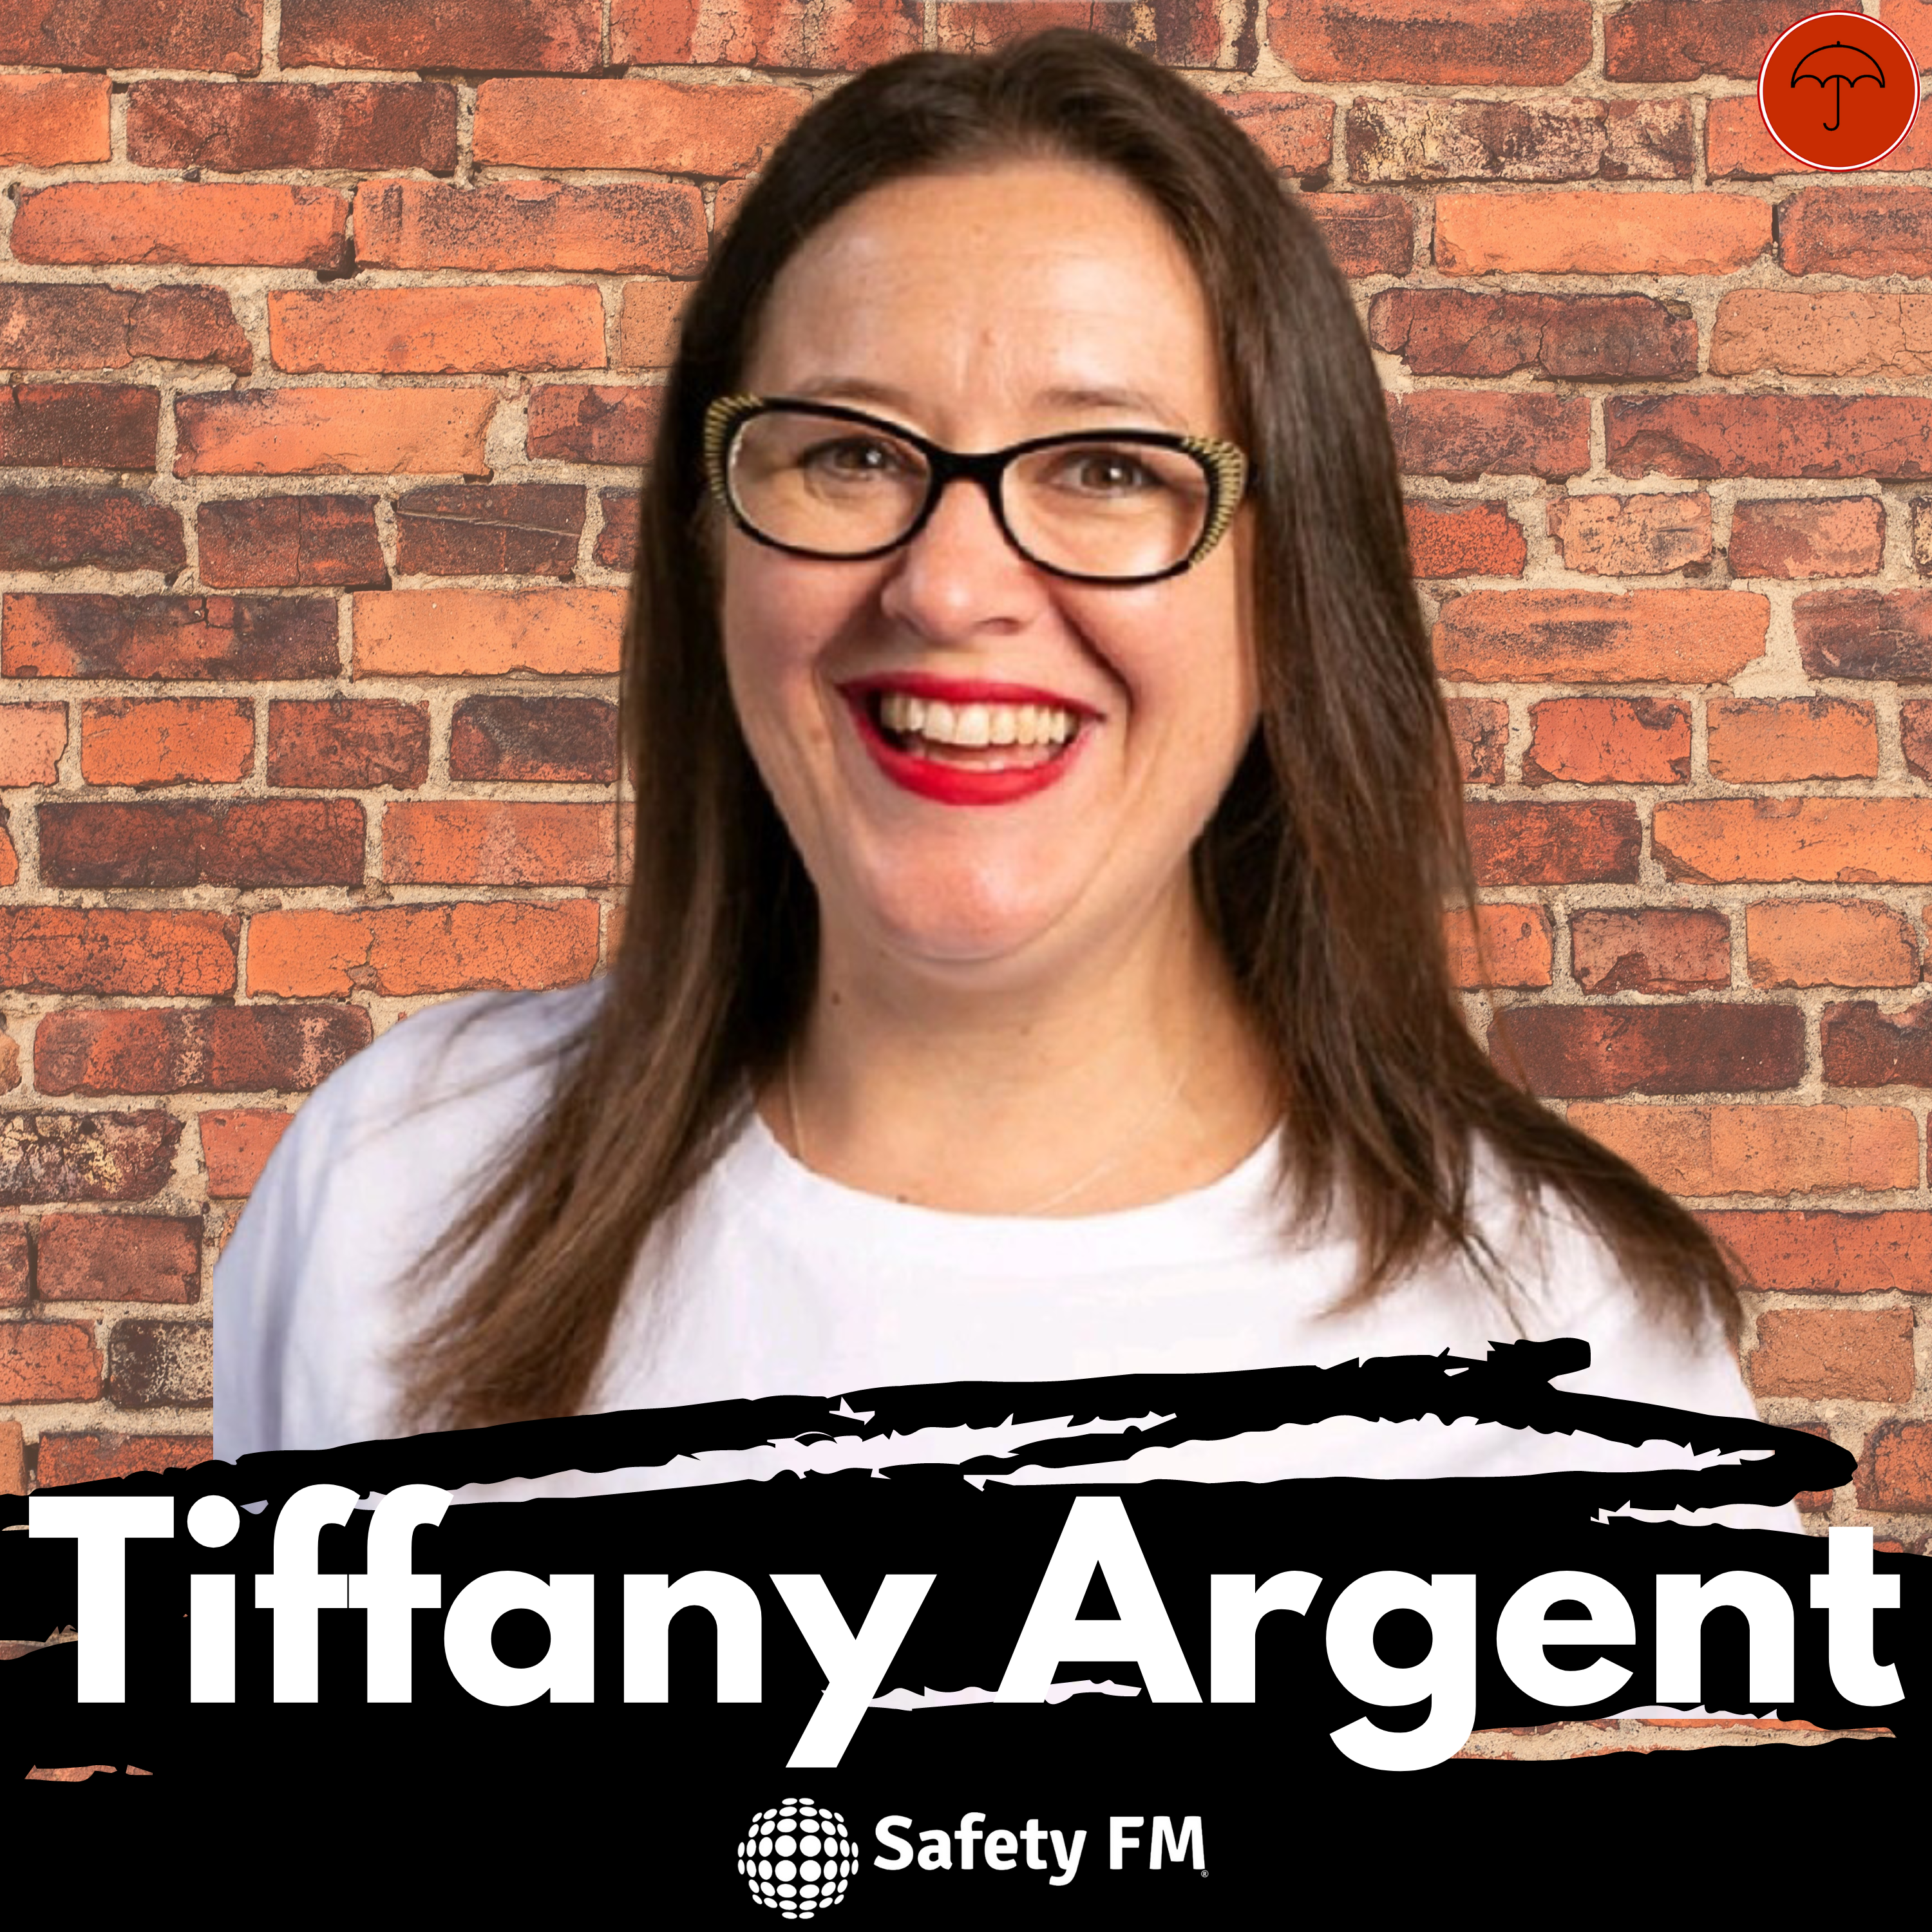 Rebranding Safety with Tiffany Argent - The problem of under-reporting accidents